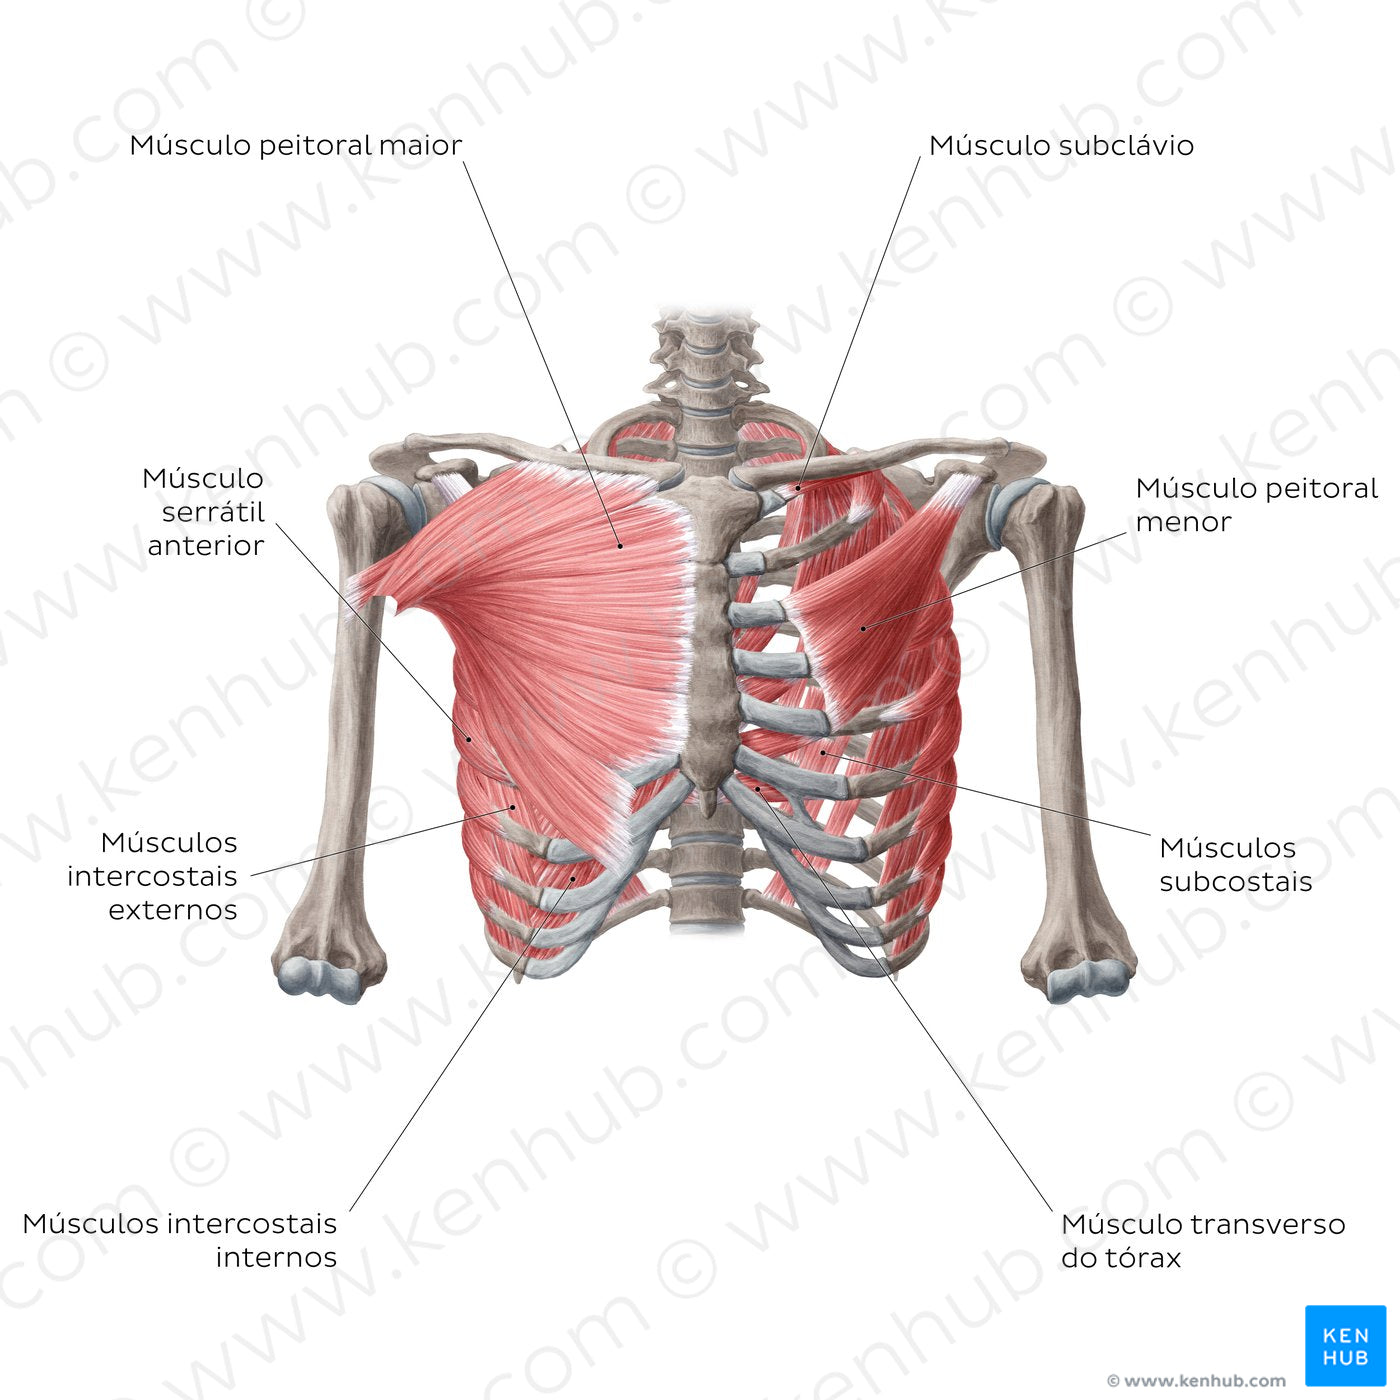 Muscles of thoracic wall (Anterior view) (Portuguese)